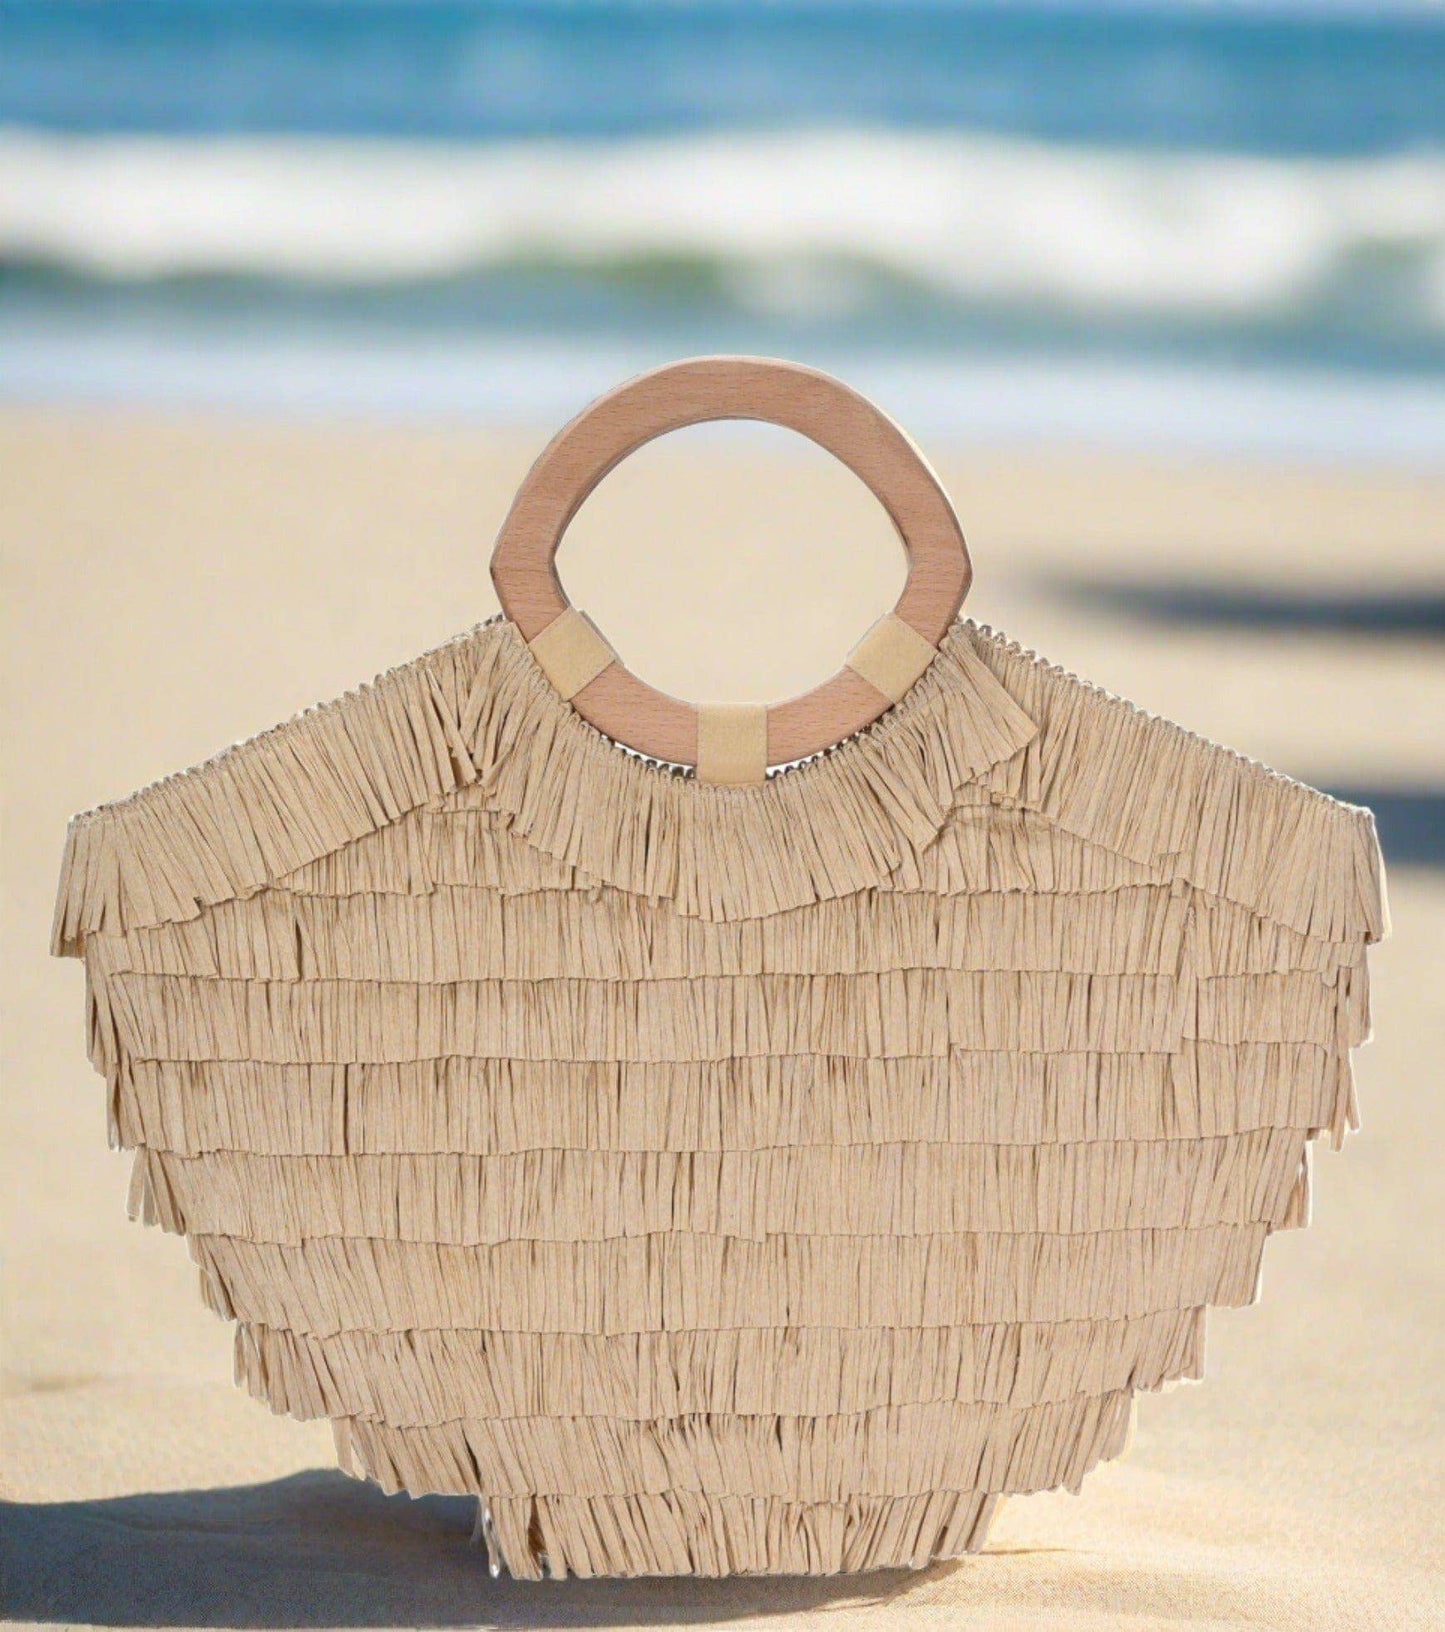 Donna Raffia Ruffle Tote Bag With Wooden Handles: Natural